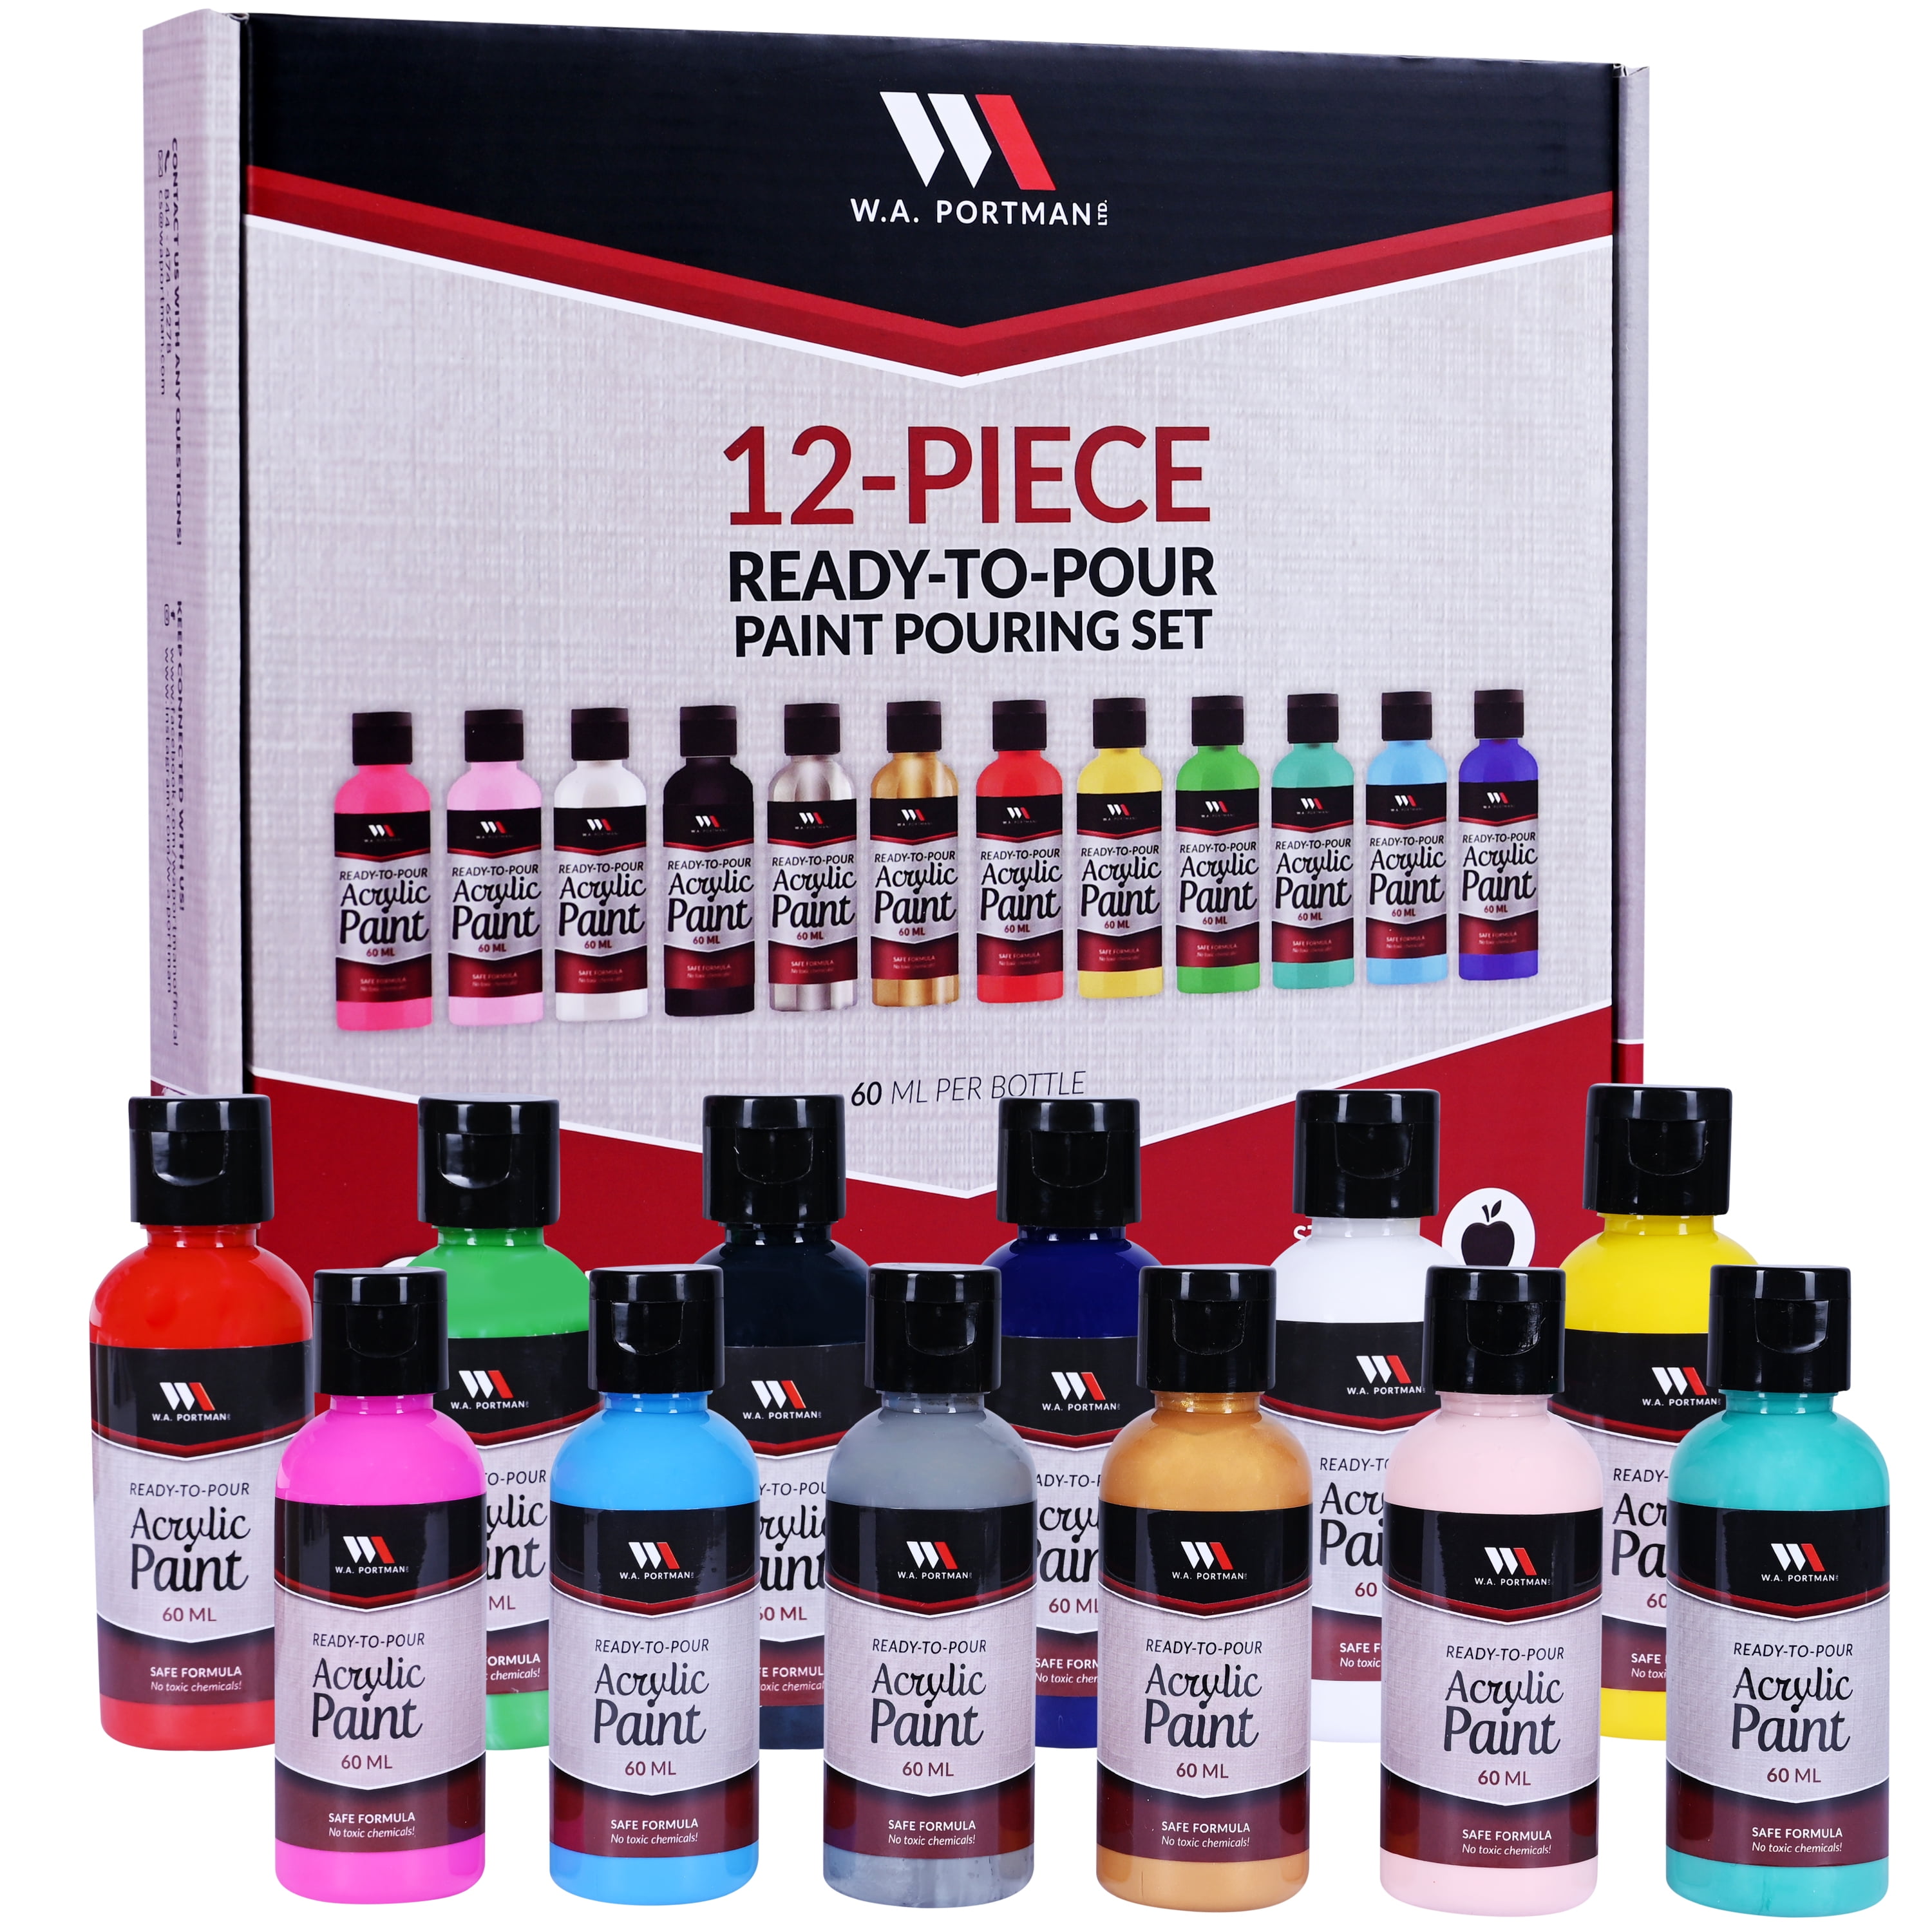 ARTEZA Pearlescent Acrylic Paint Set of 14, 2 fl oz Bottles, Quick-Drying  Pearl Craft Paint, Art Supplies for Paper, Canvas, Wood, Glass Paper